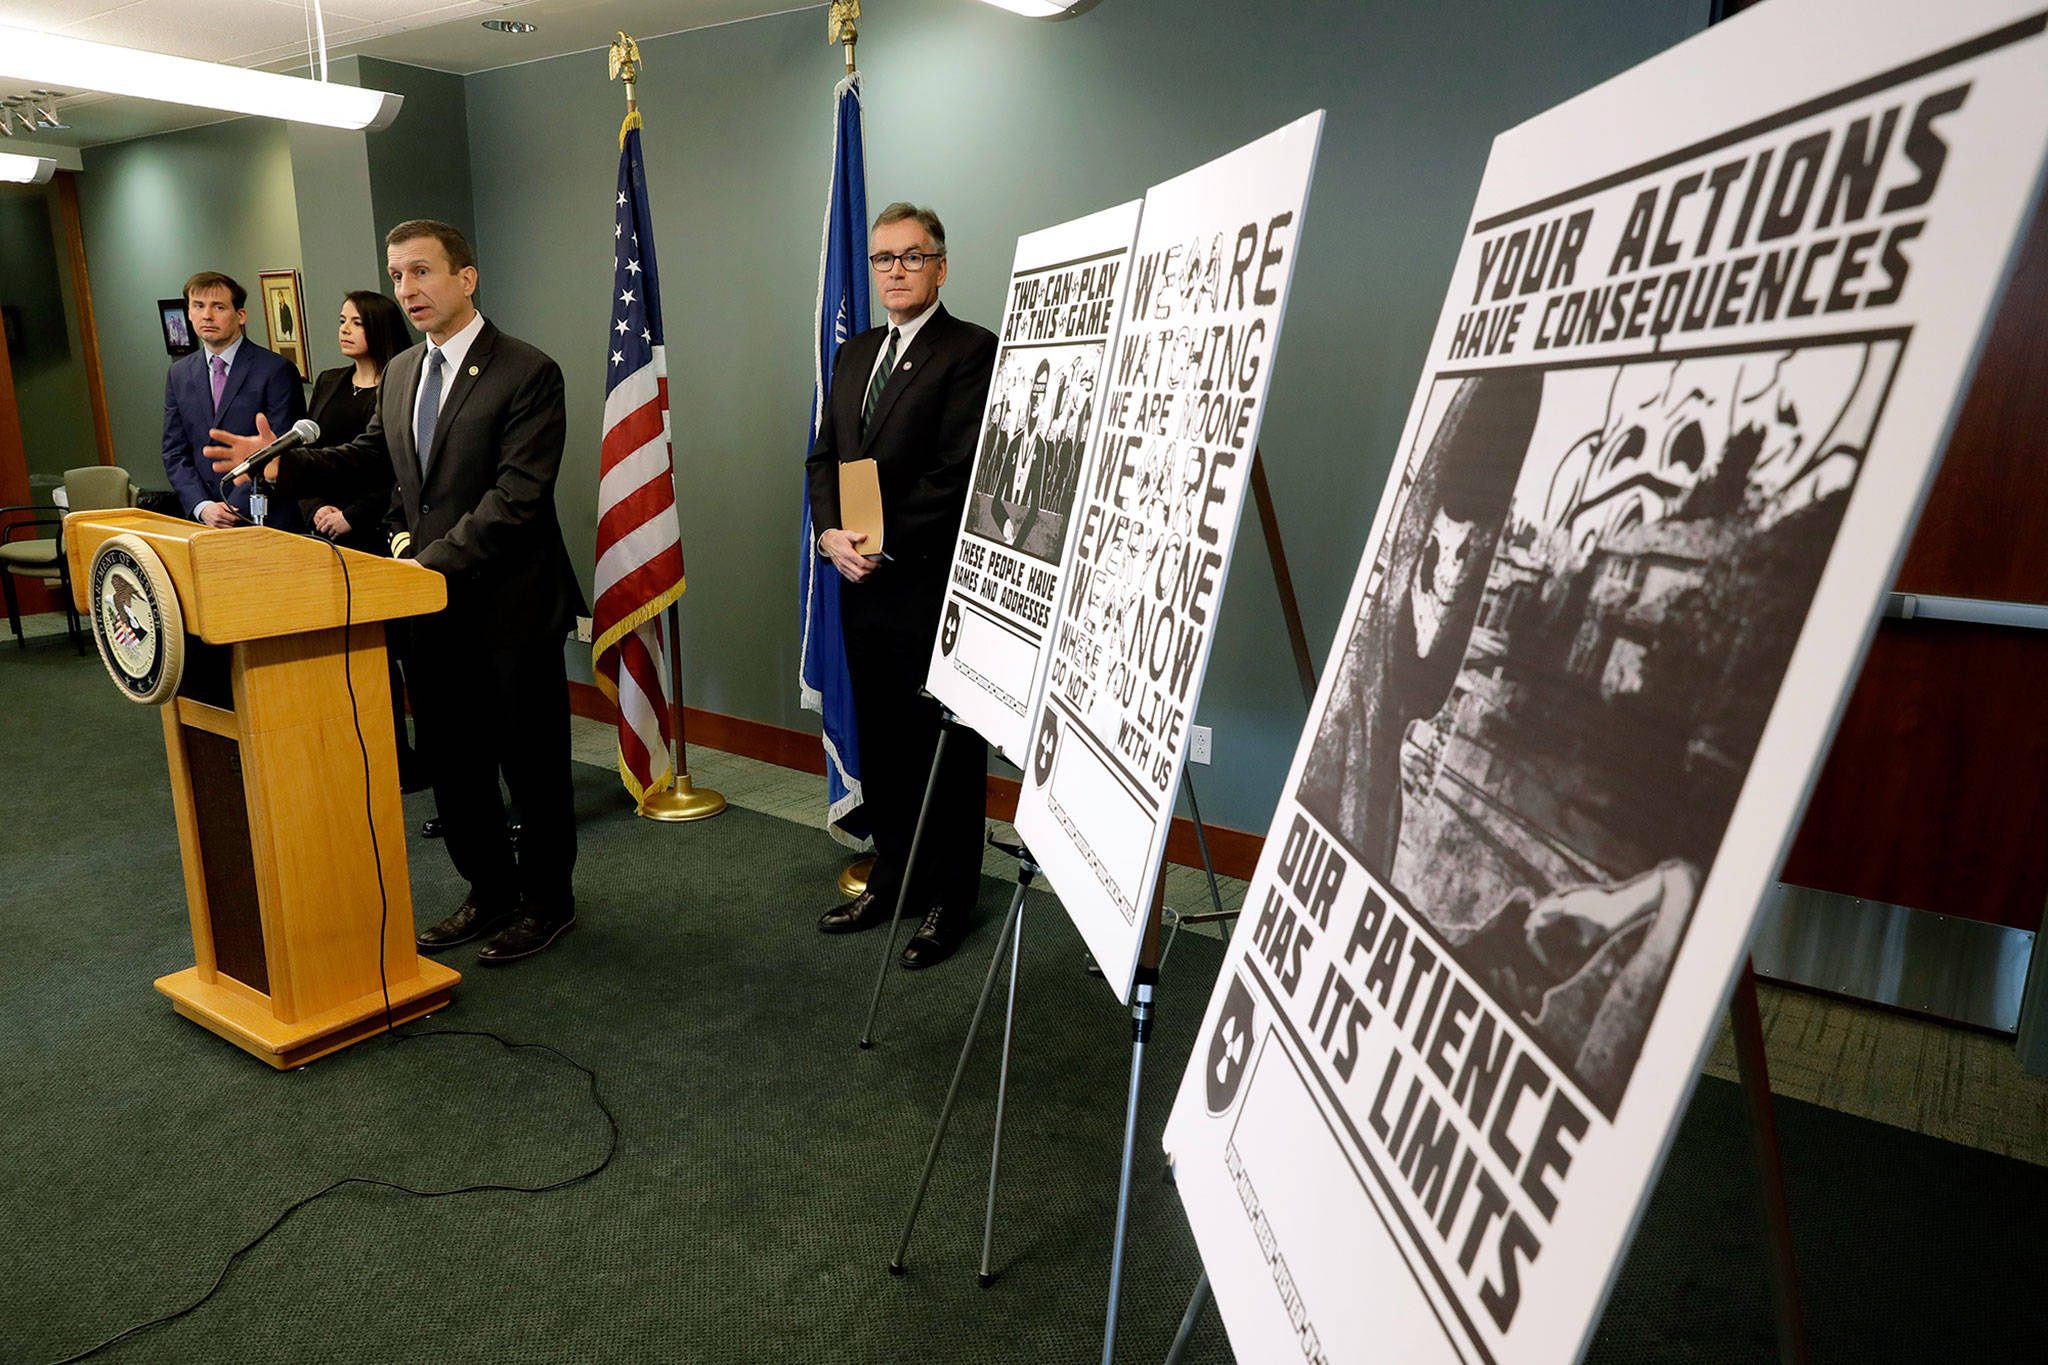 Raymond Duda (at podium), FBI Special Agent in Charge in Seattle, speaks during a news conference Feb. 26 about charges against a group of alleged members of the neo-Nazi group Atomwaffen Division for cyber-stalking and mailing threatening communications — including the Swastika-laden posters at right — in a campaign against journalists in several cities. (AP Photo/Ted S. Warren, file)